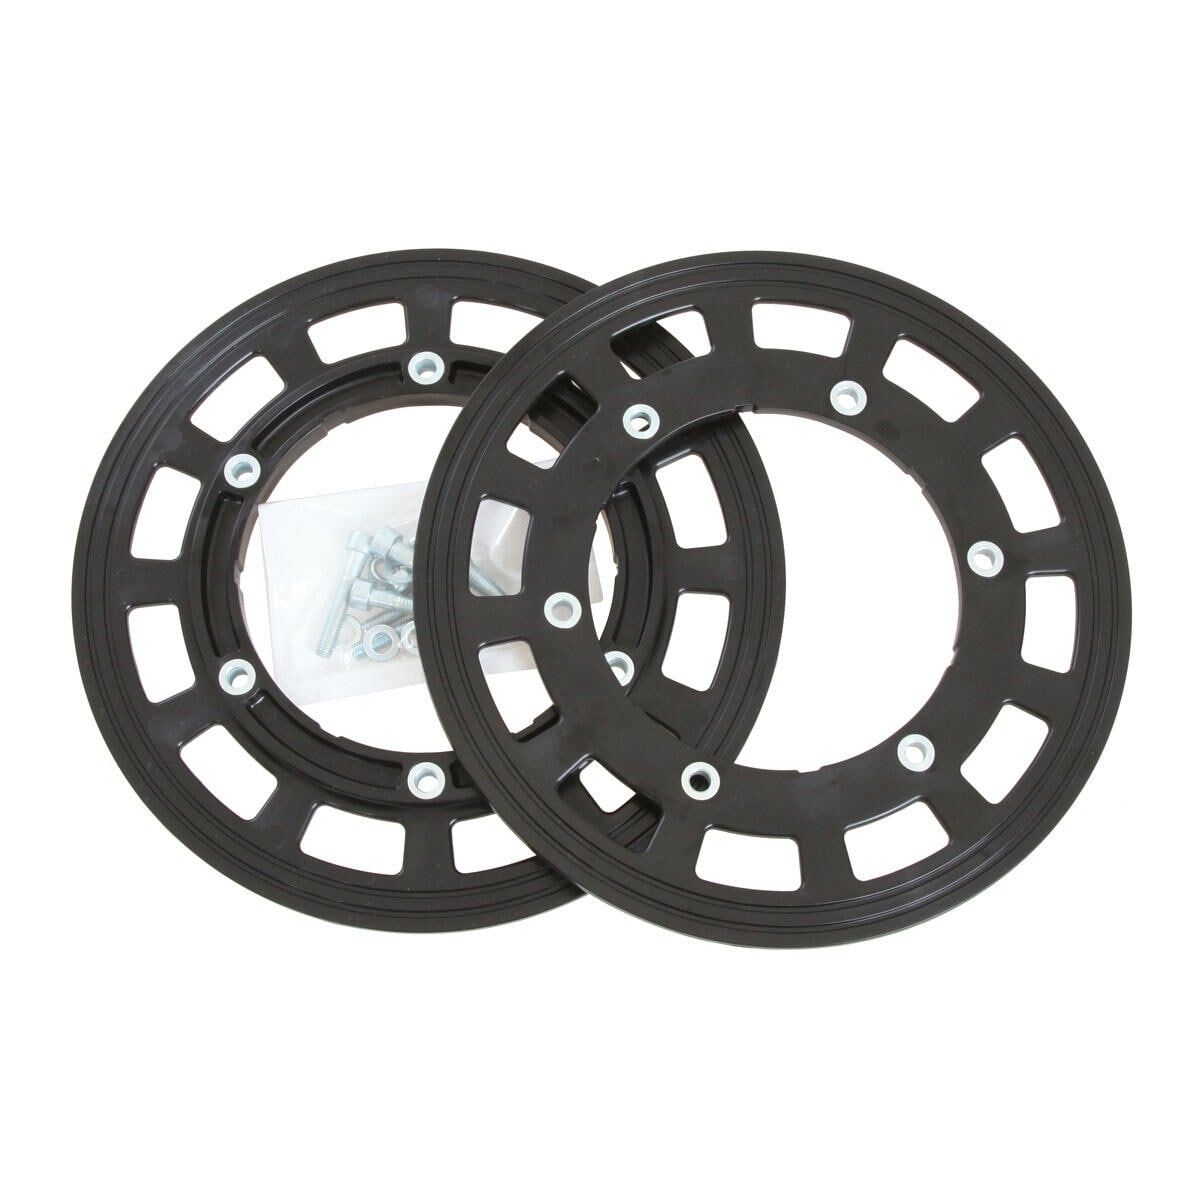 Sprocket and Chain Protector RR